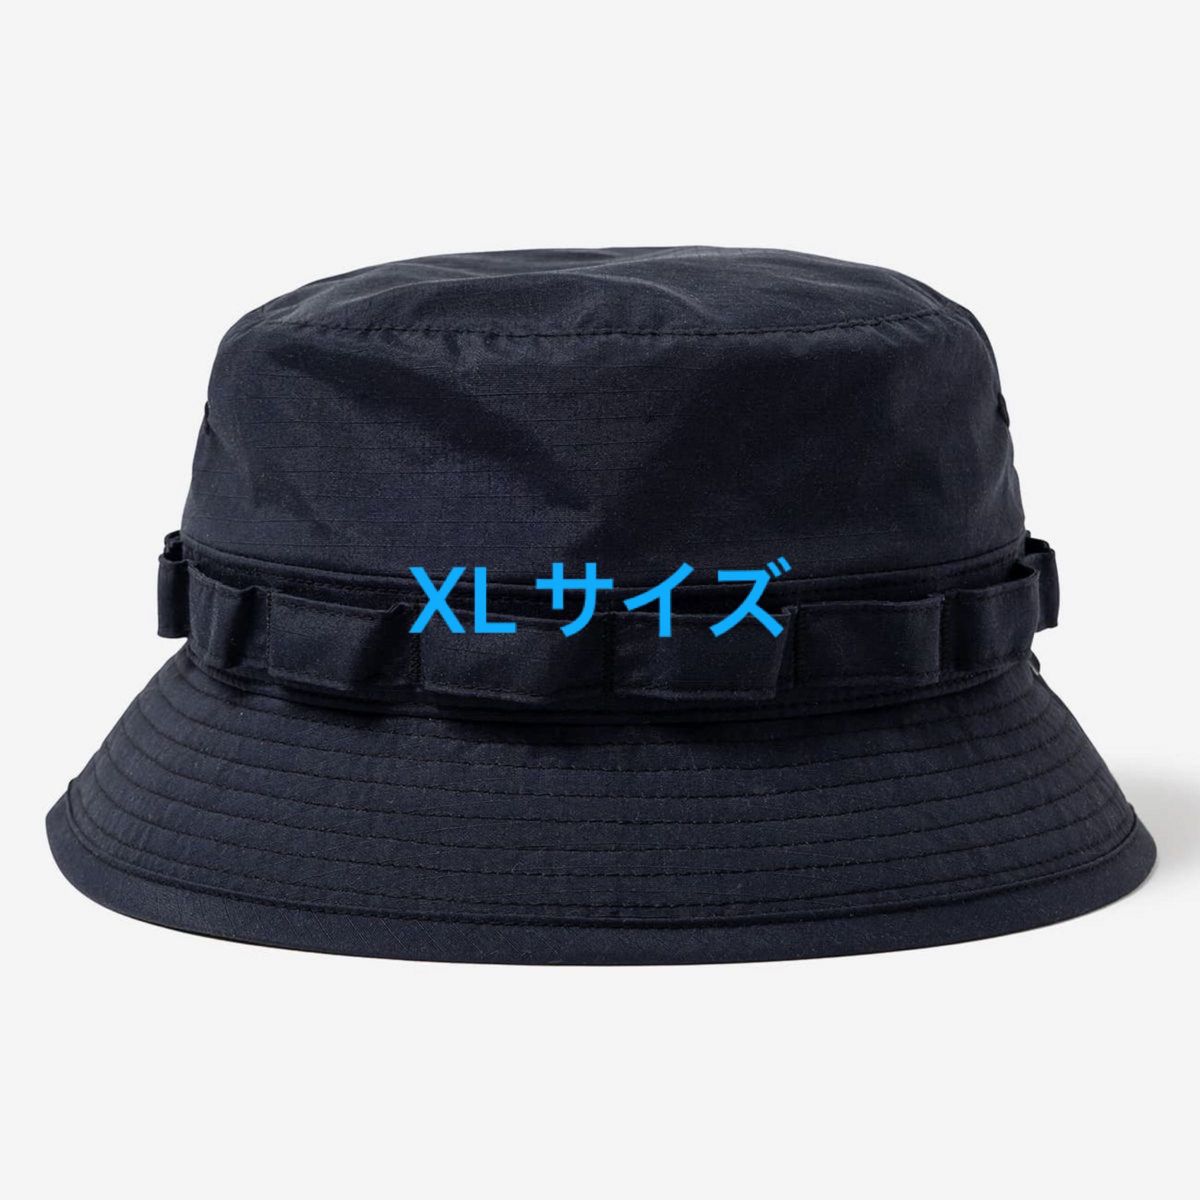 wtaps 23aw jungle hat 01 ripstop XL ジャングルハット Yahoo